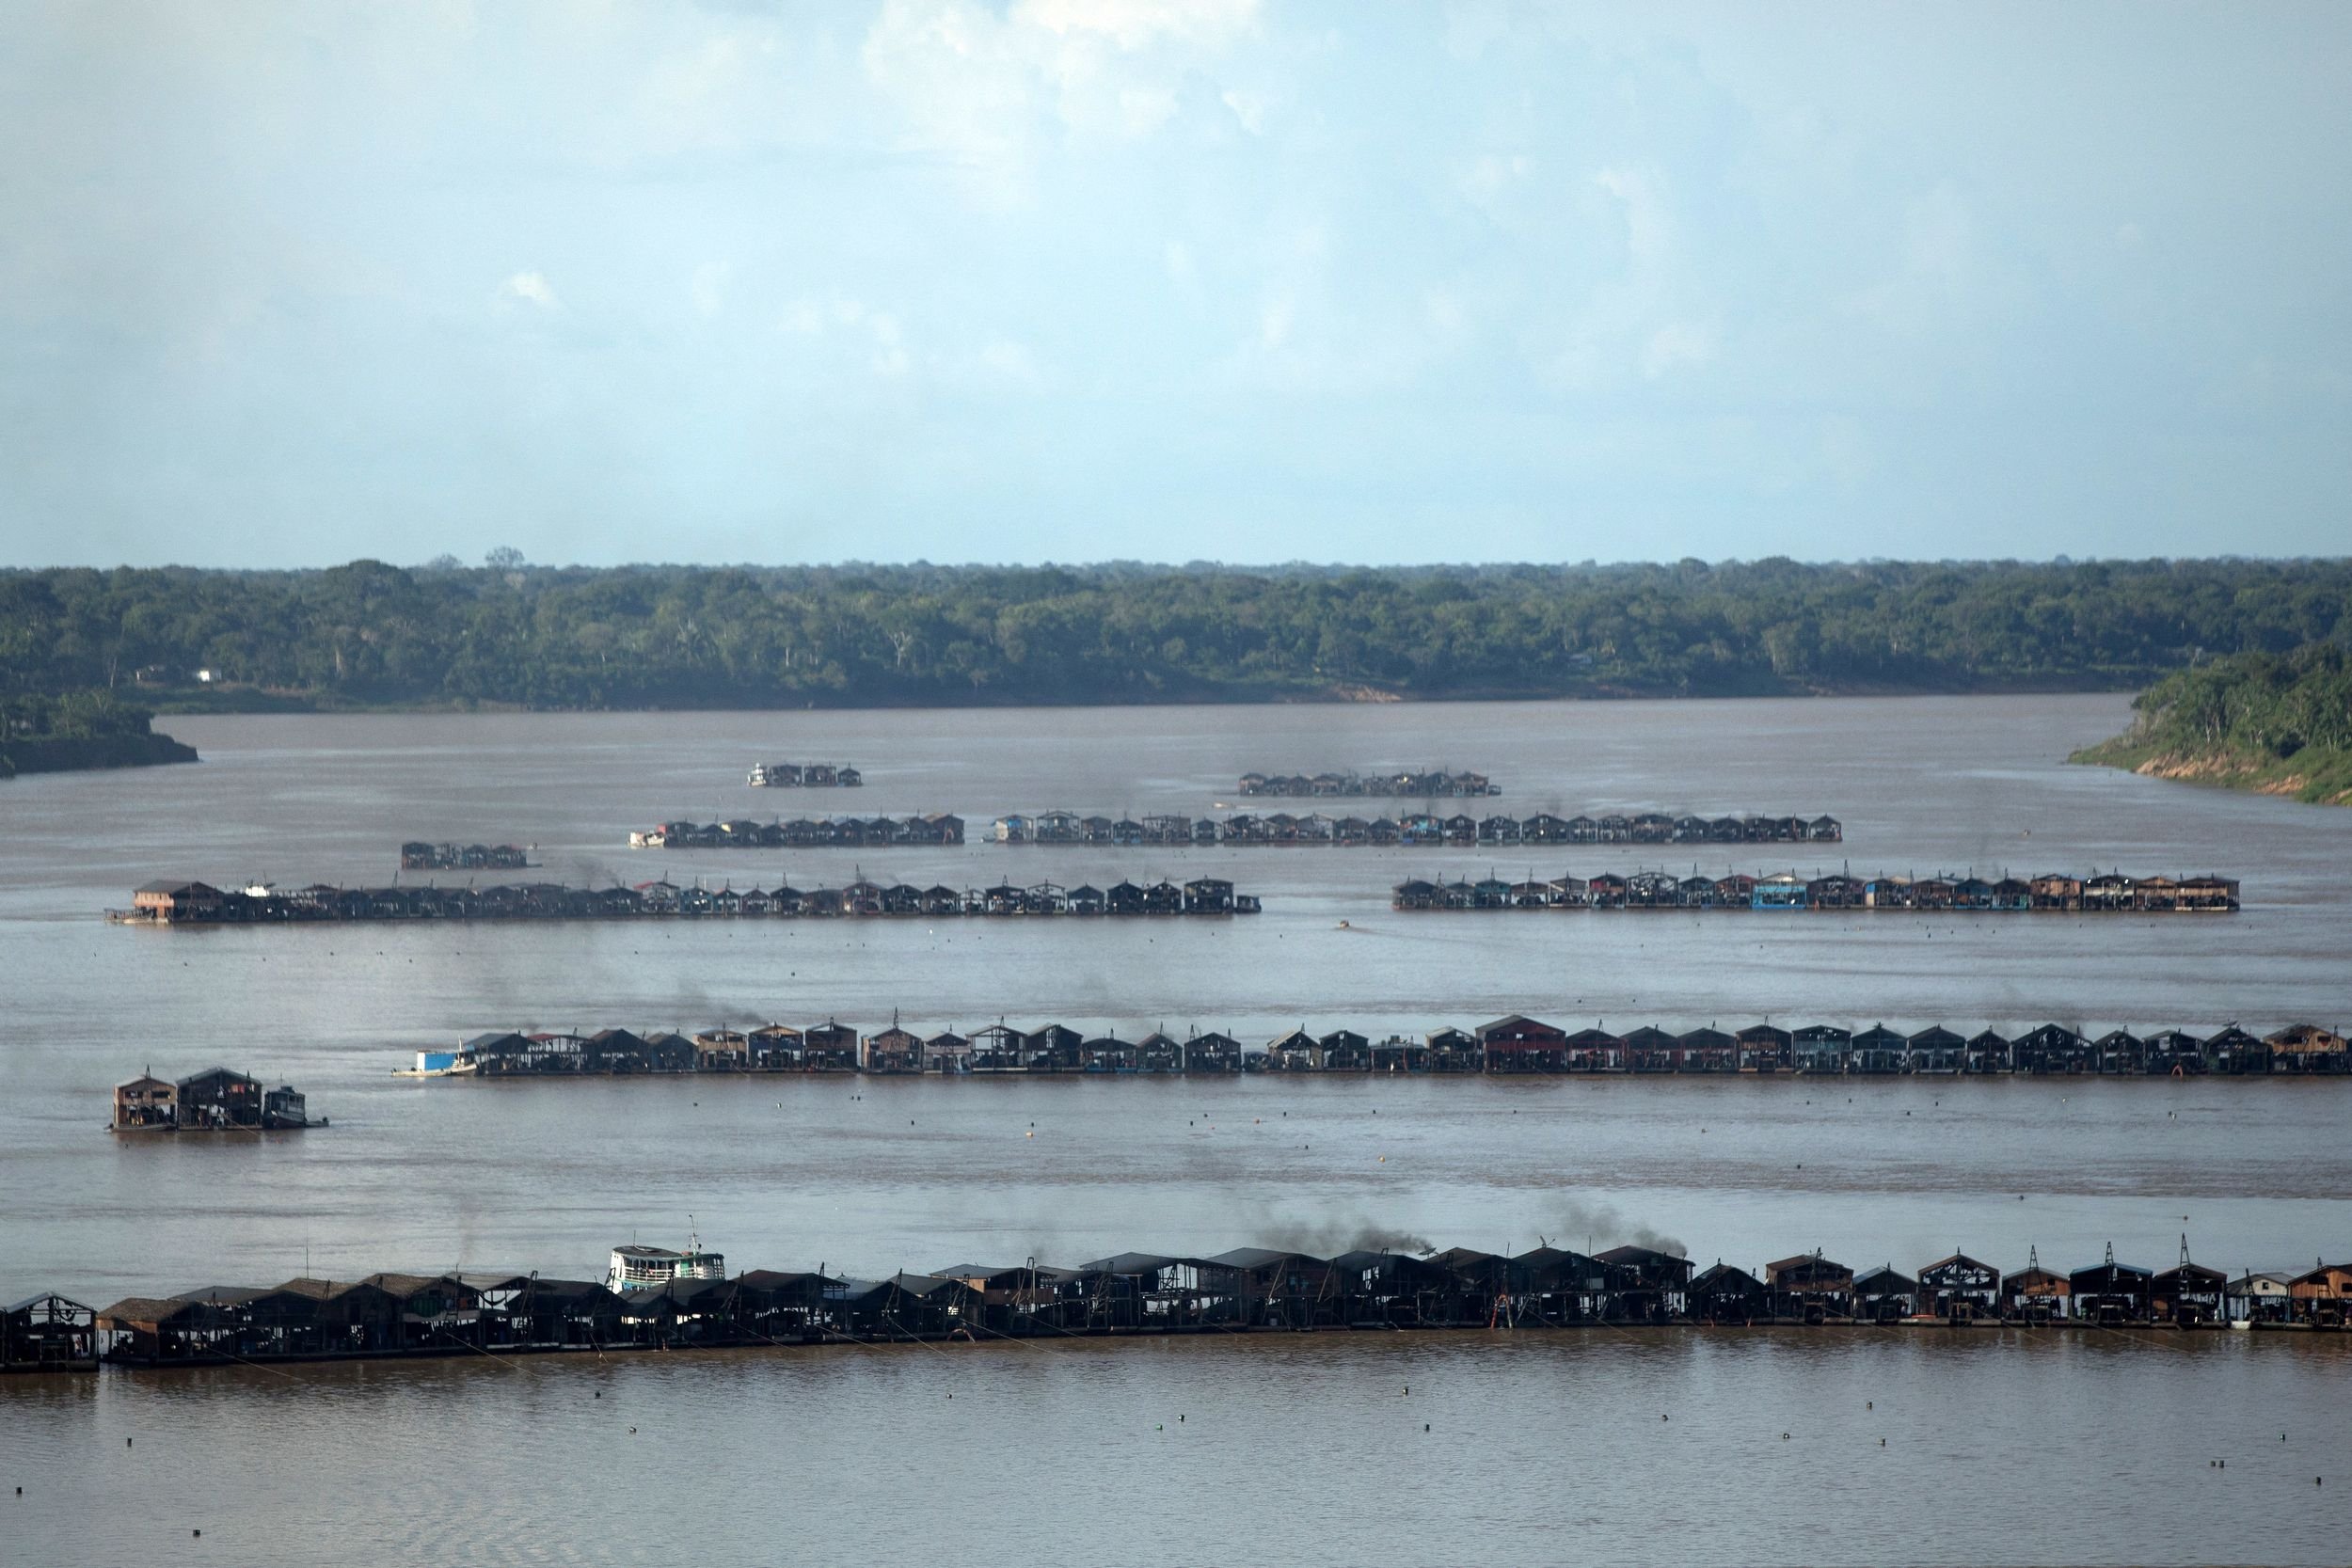 This handout photo released by Greenpeace shows accommodations and mining structures on the Madeira River near the Rosarinho community, in Autazes, Amazonas state, Brazil, Nov. 23, 2021. (AFP Photo)